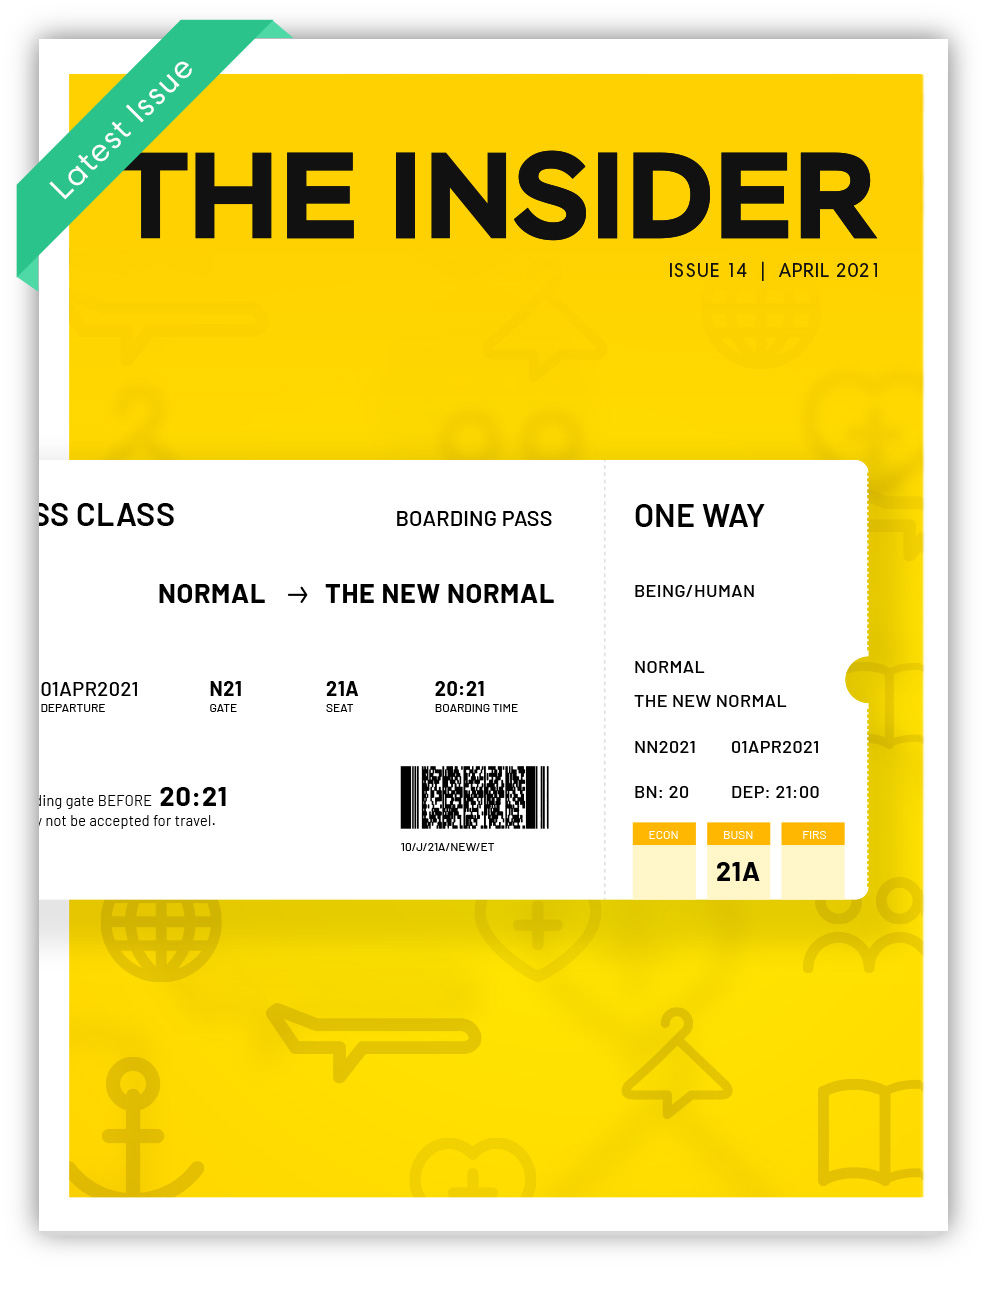 The Insider latest issue